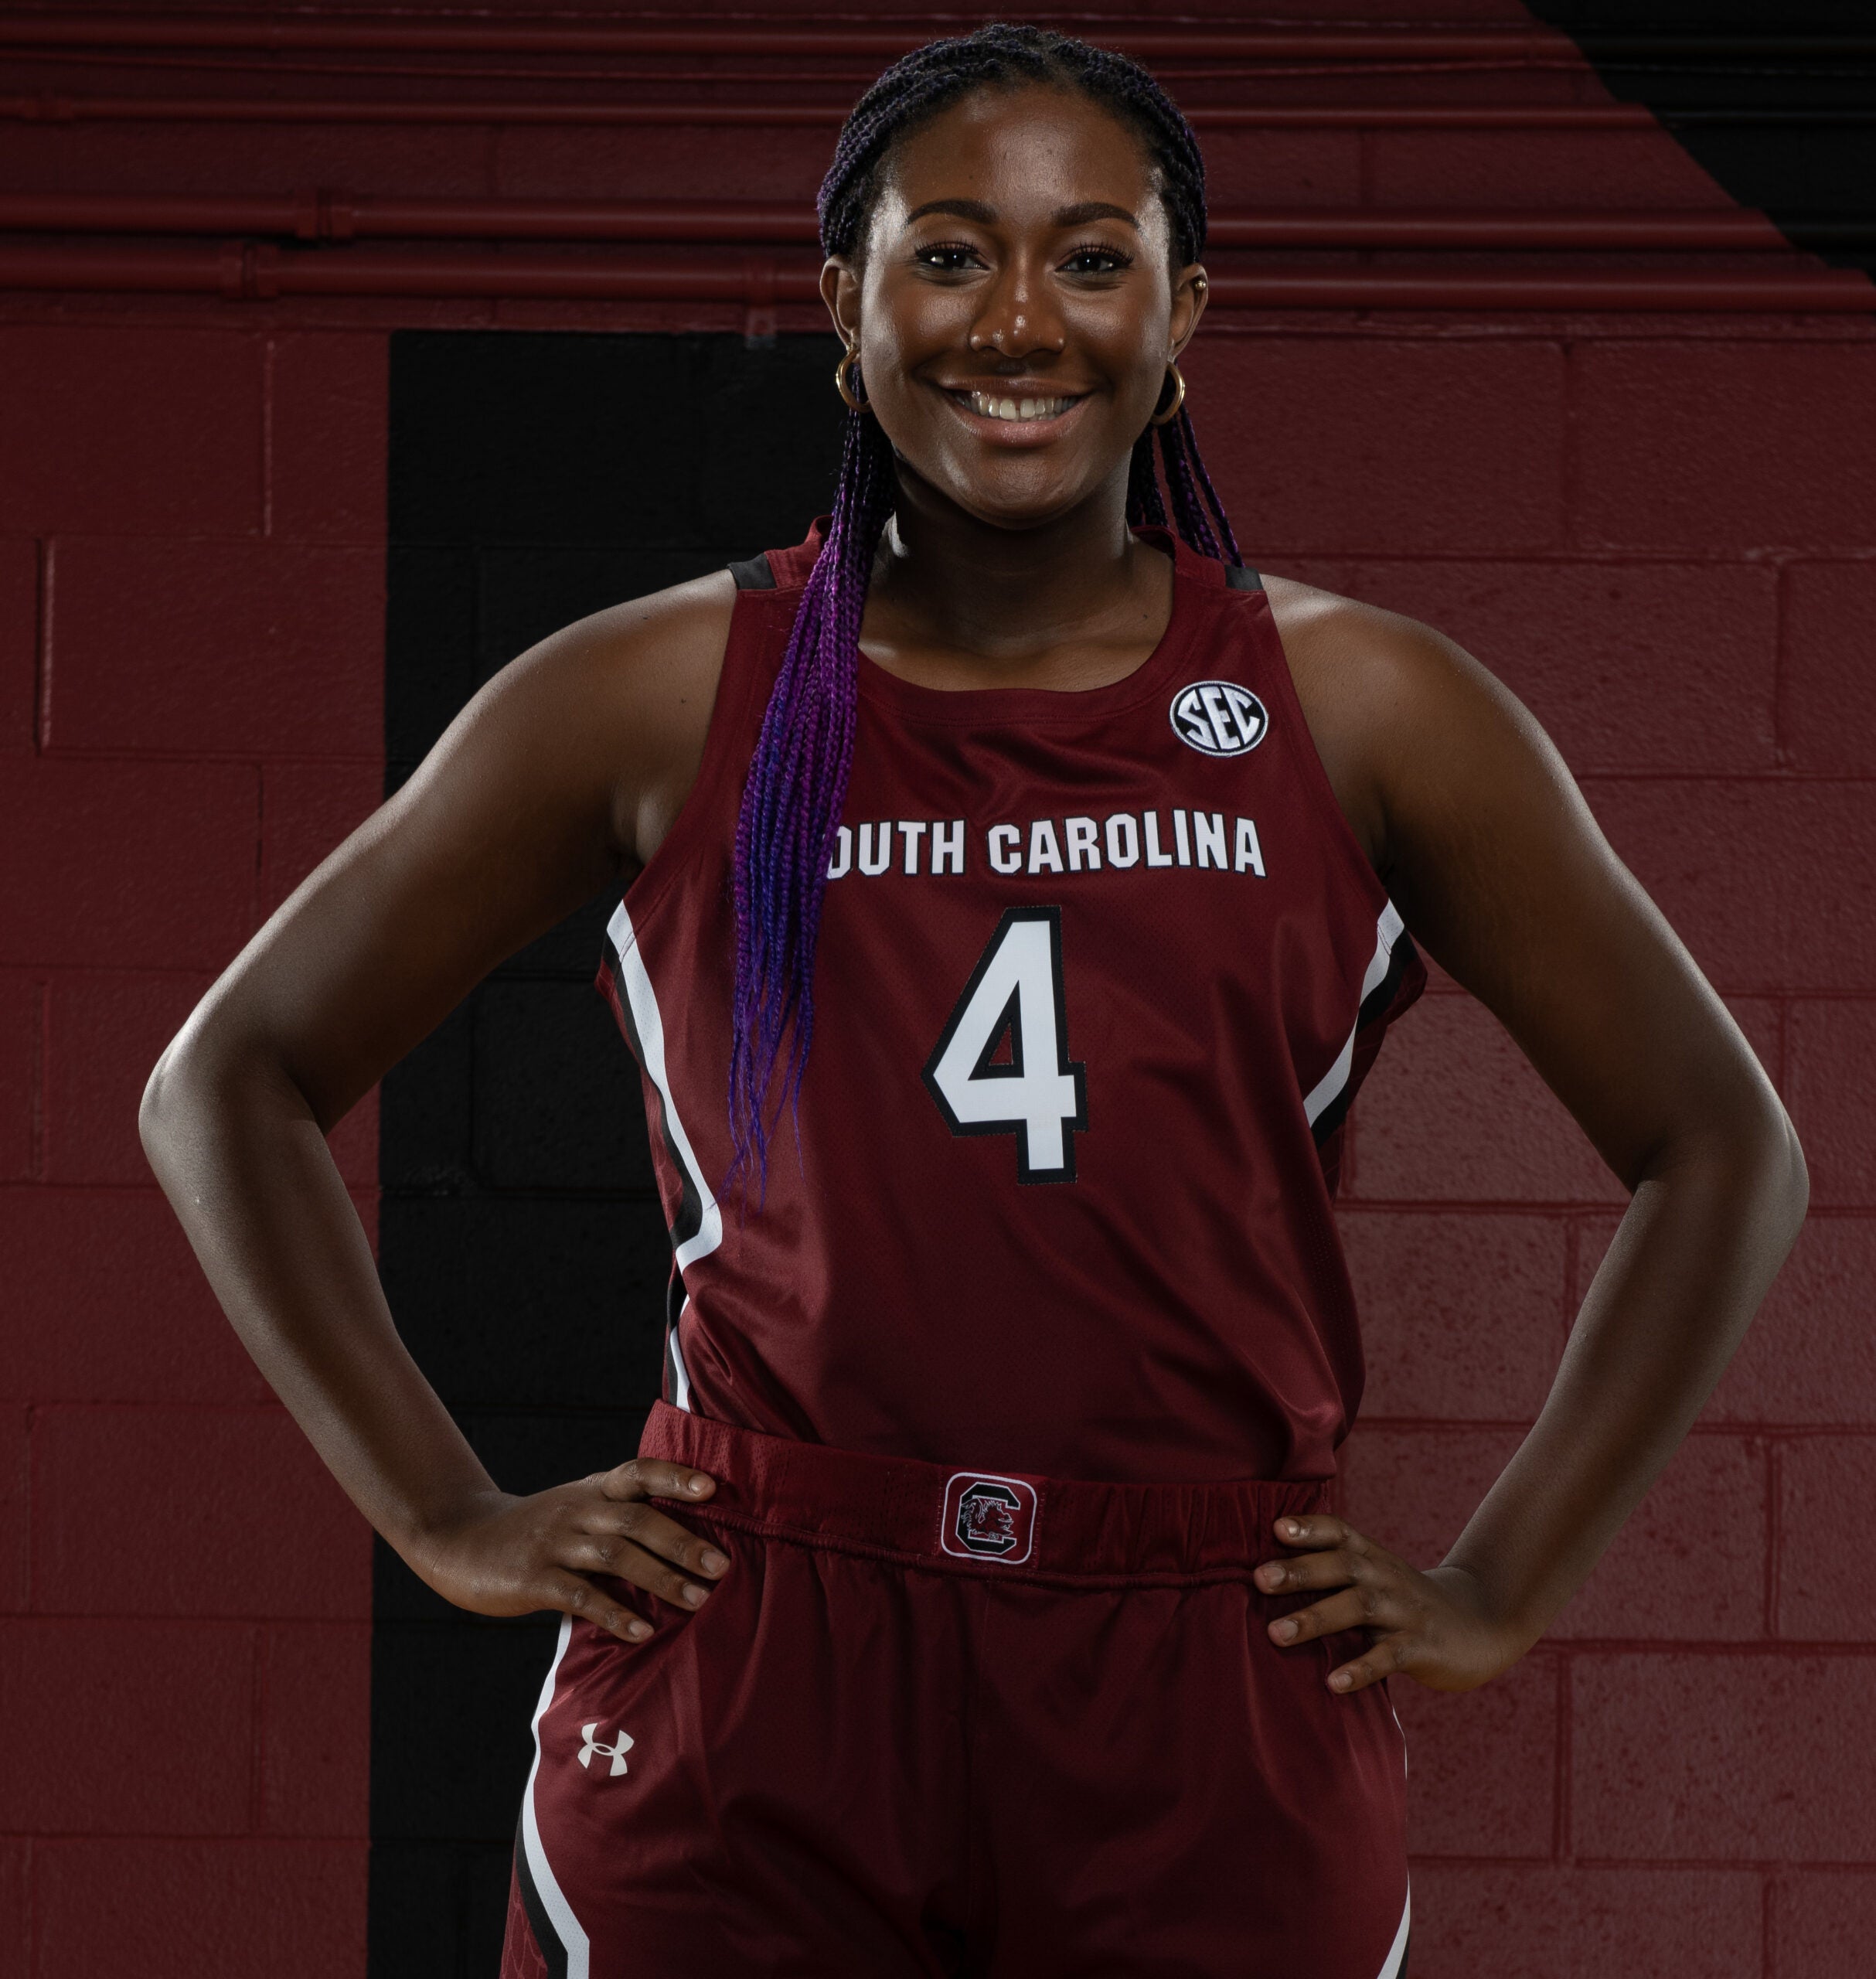 From the Virgin Islands to South Carolina, Aliyah Boston is ready for